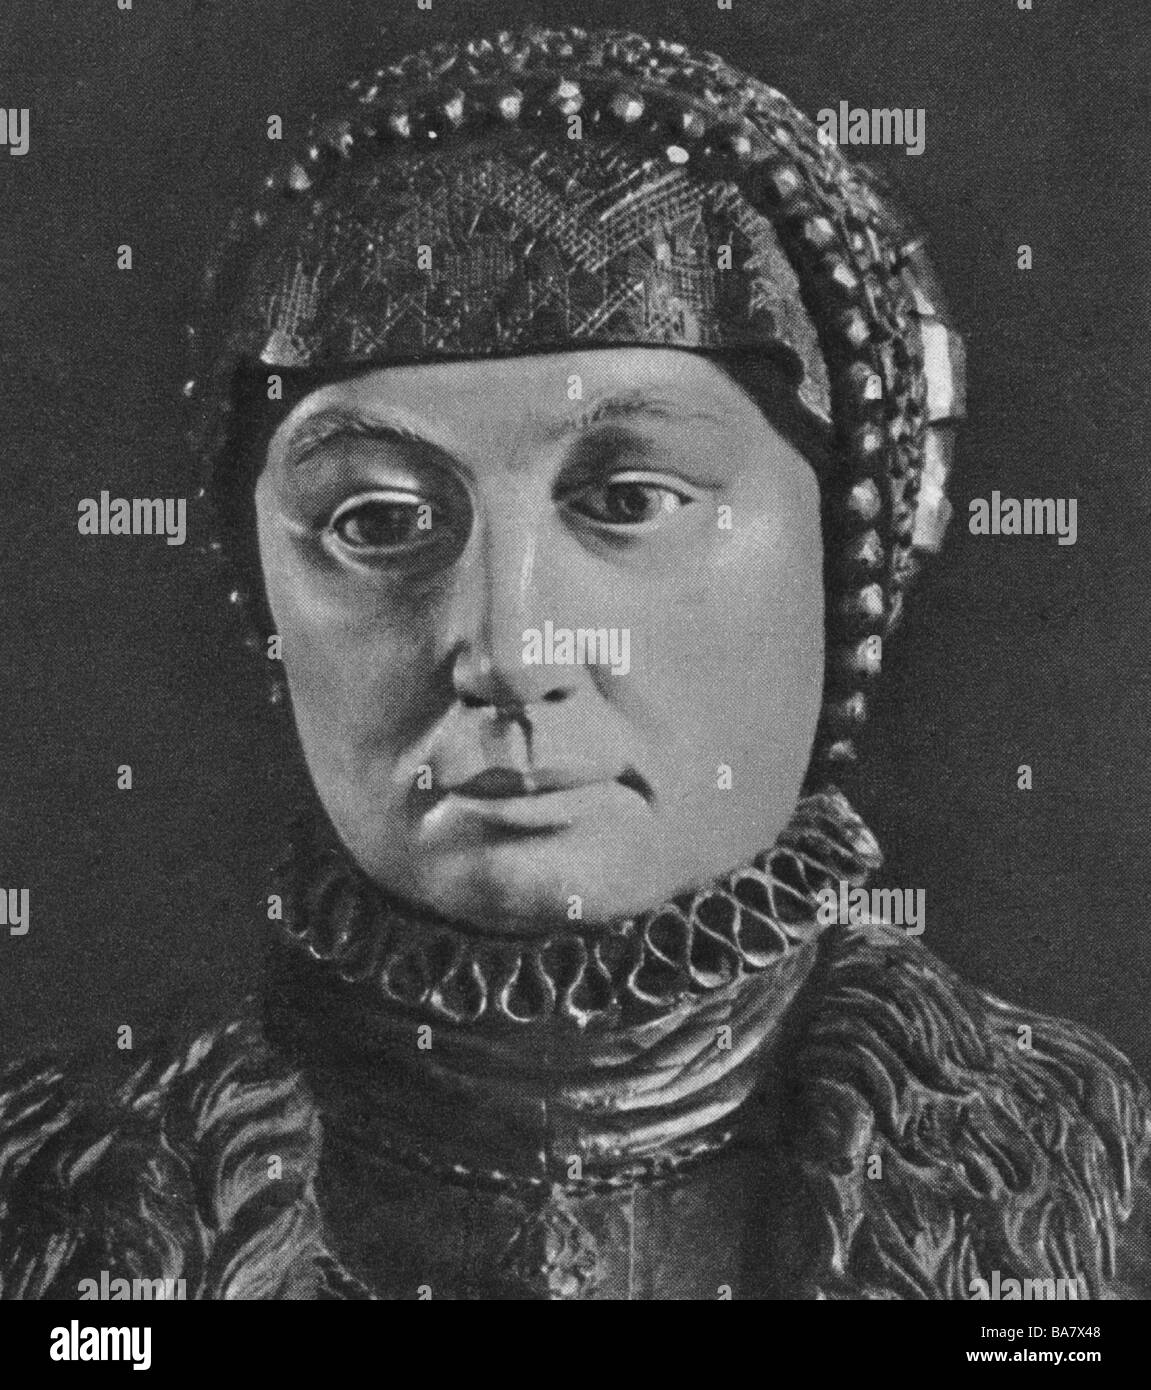 Stock Photo - Uttmann, Barbara, 1514 - 15.10.1575, German inventor of bobbin lace making, portrait, face of a carved figure from the 16th cent - uttmann-barbara-1514-15101575-german-inventor-of-bobbin-lace-making-BA7X48